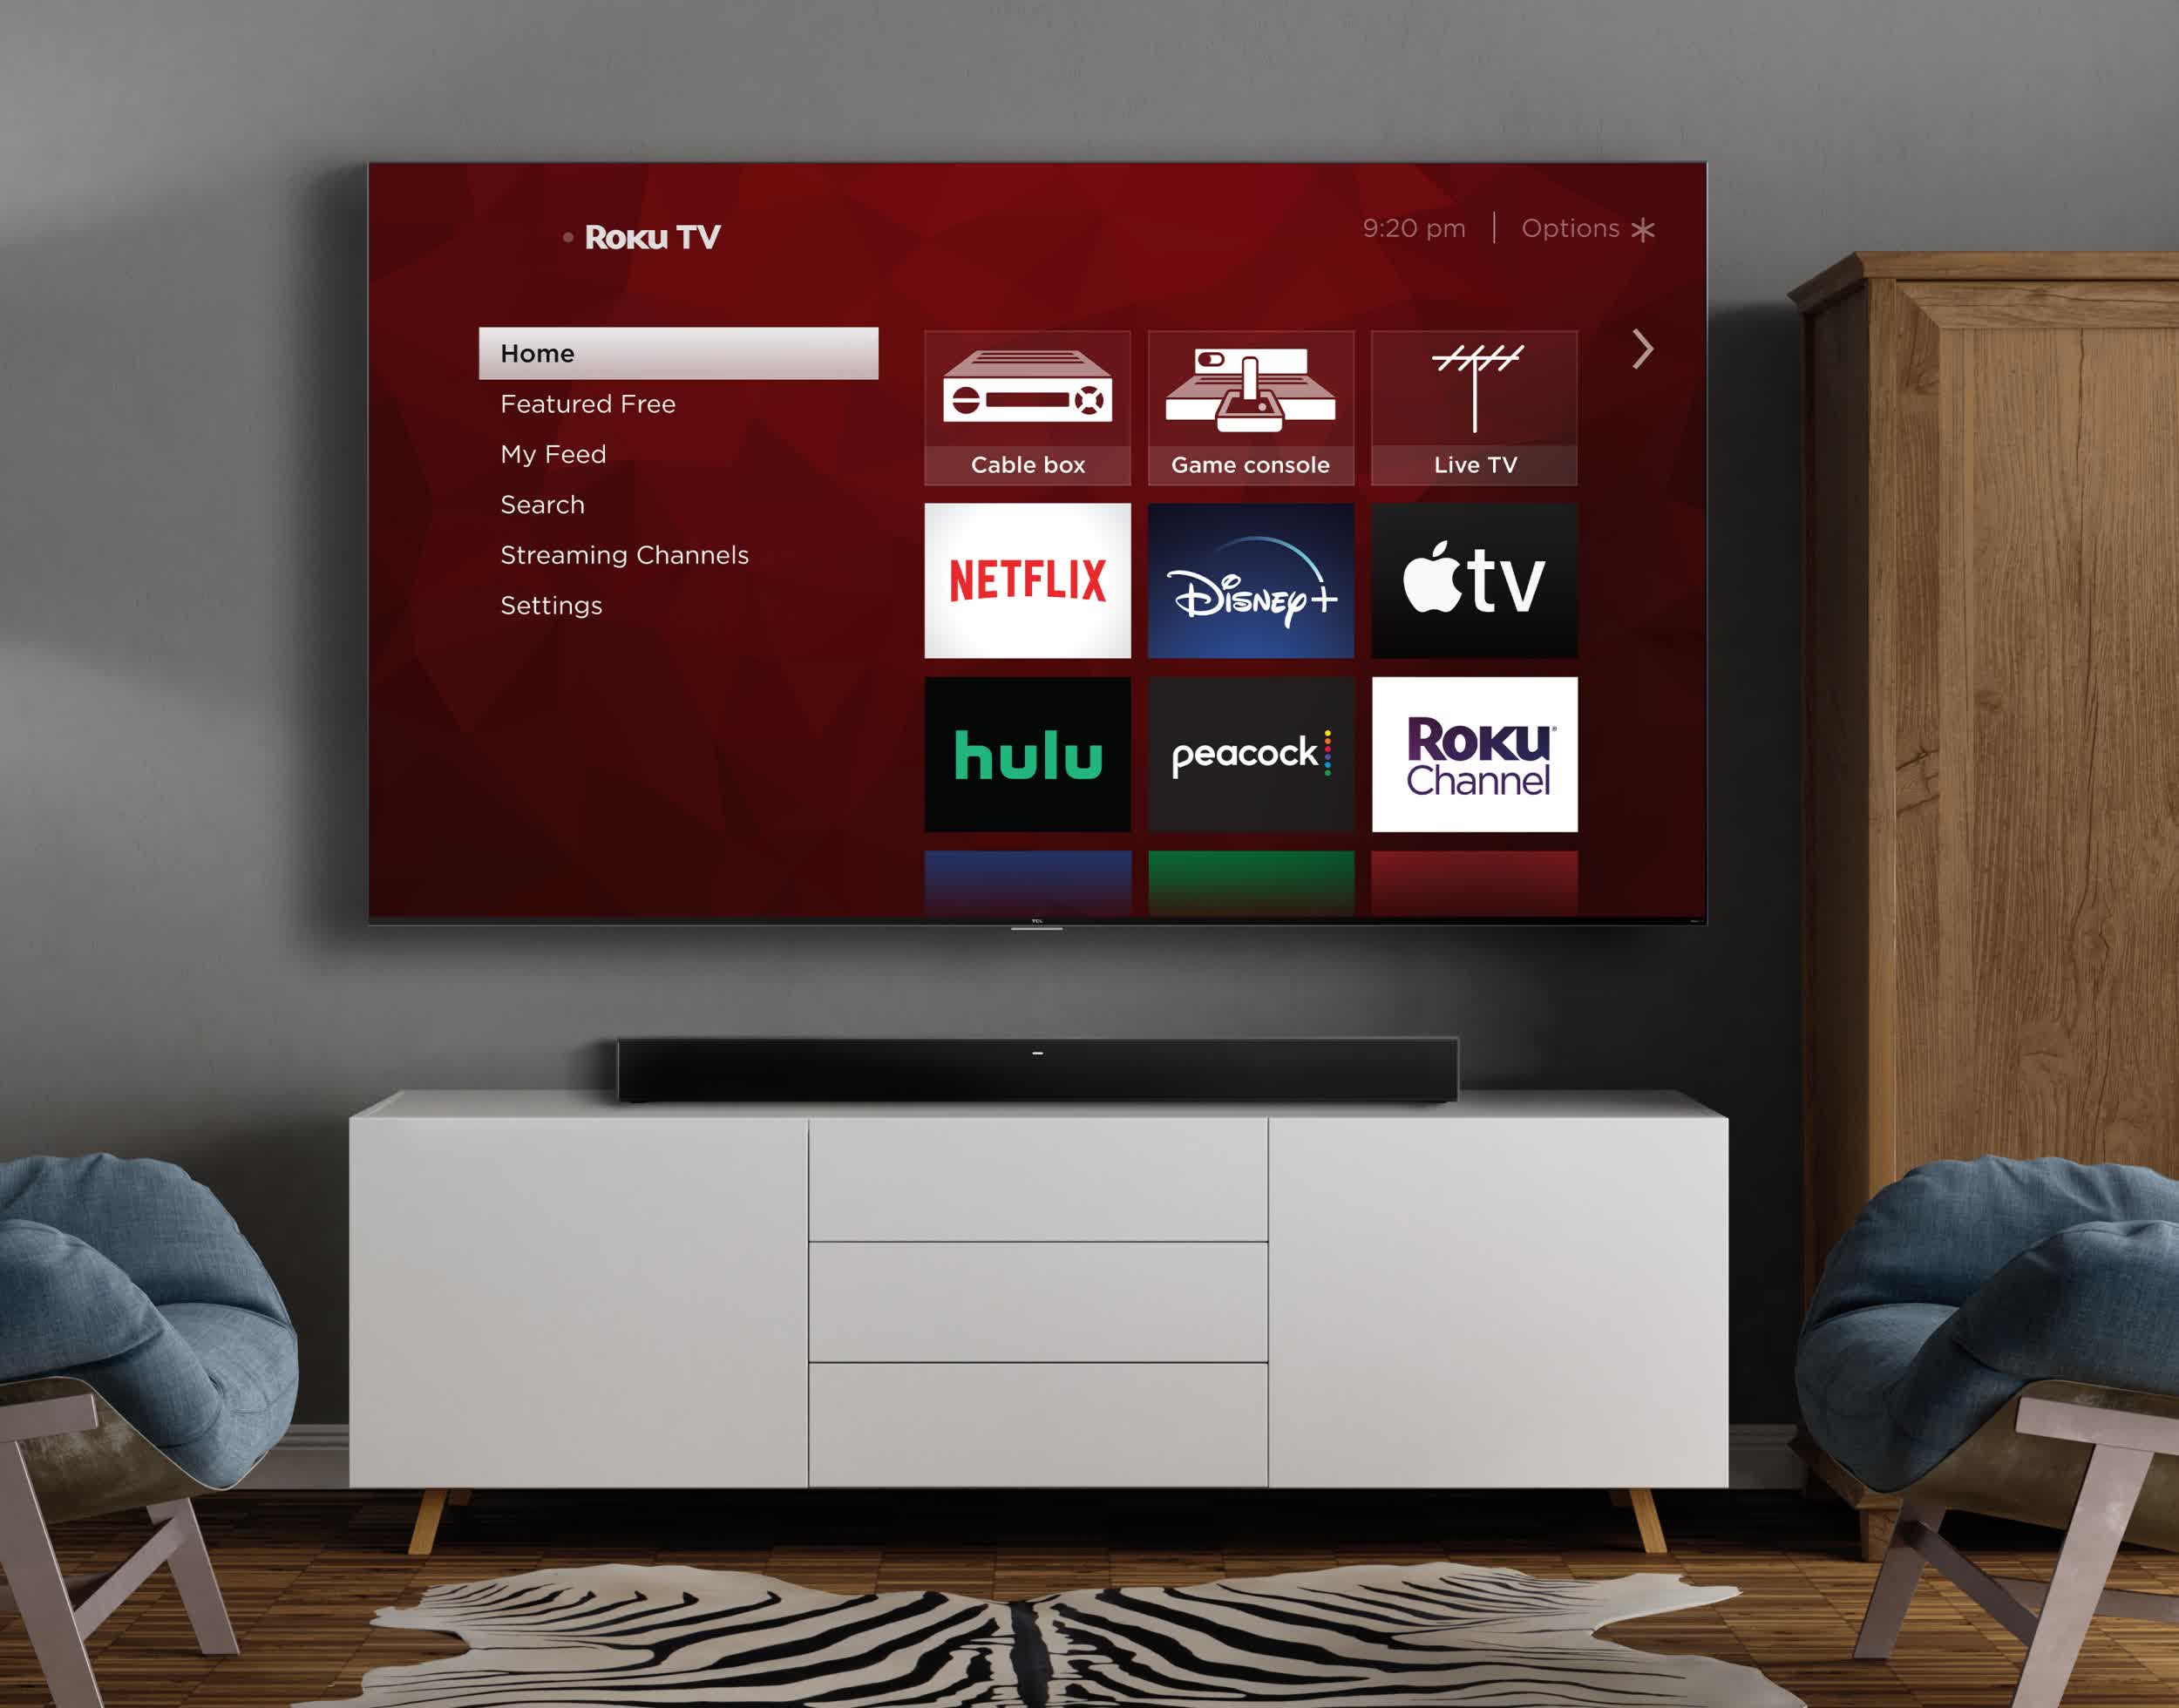 Roku could manufacture its own television sets